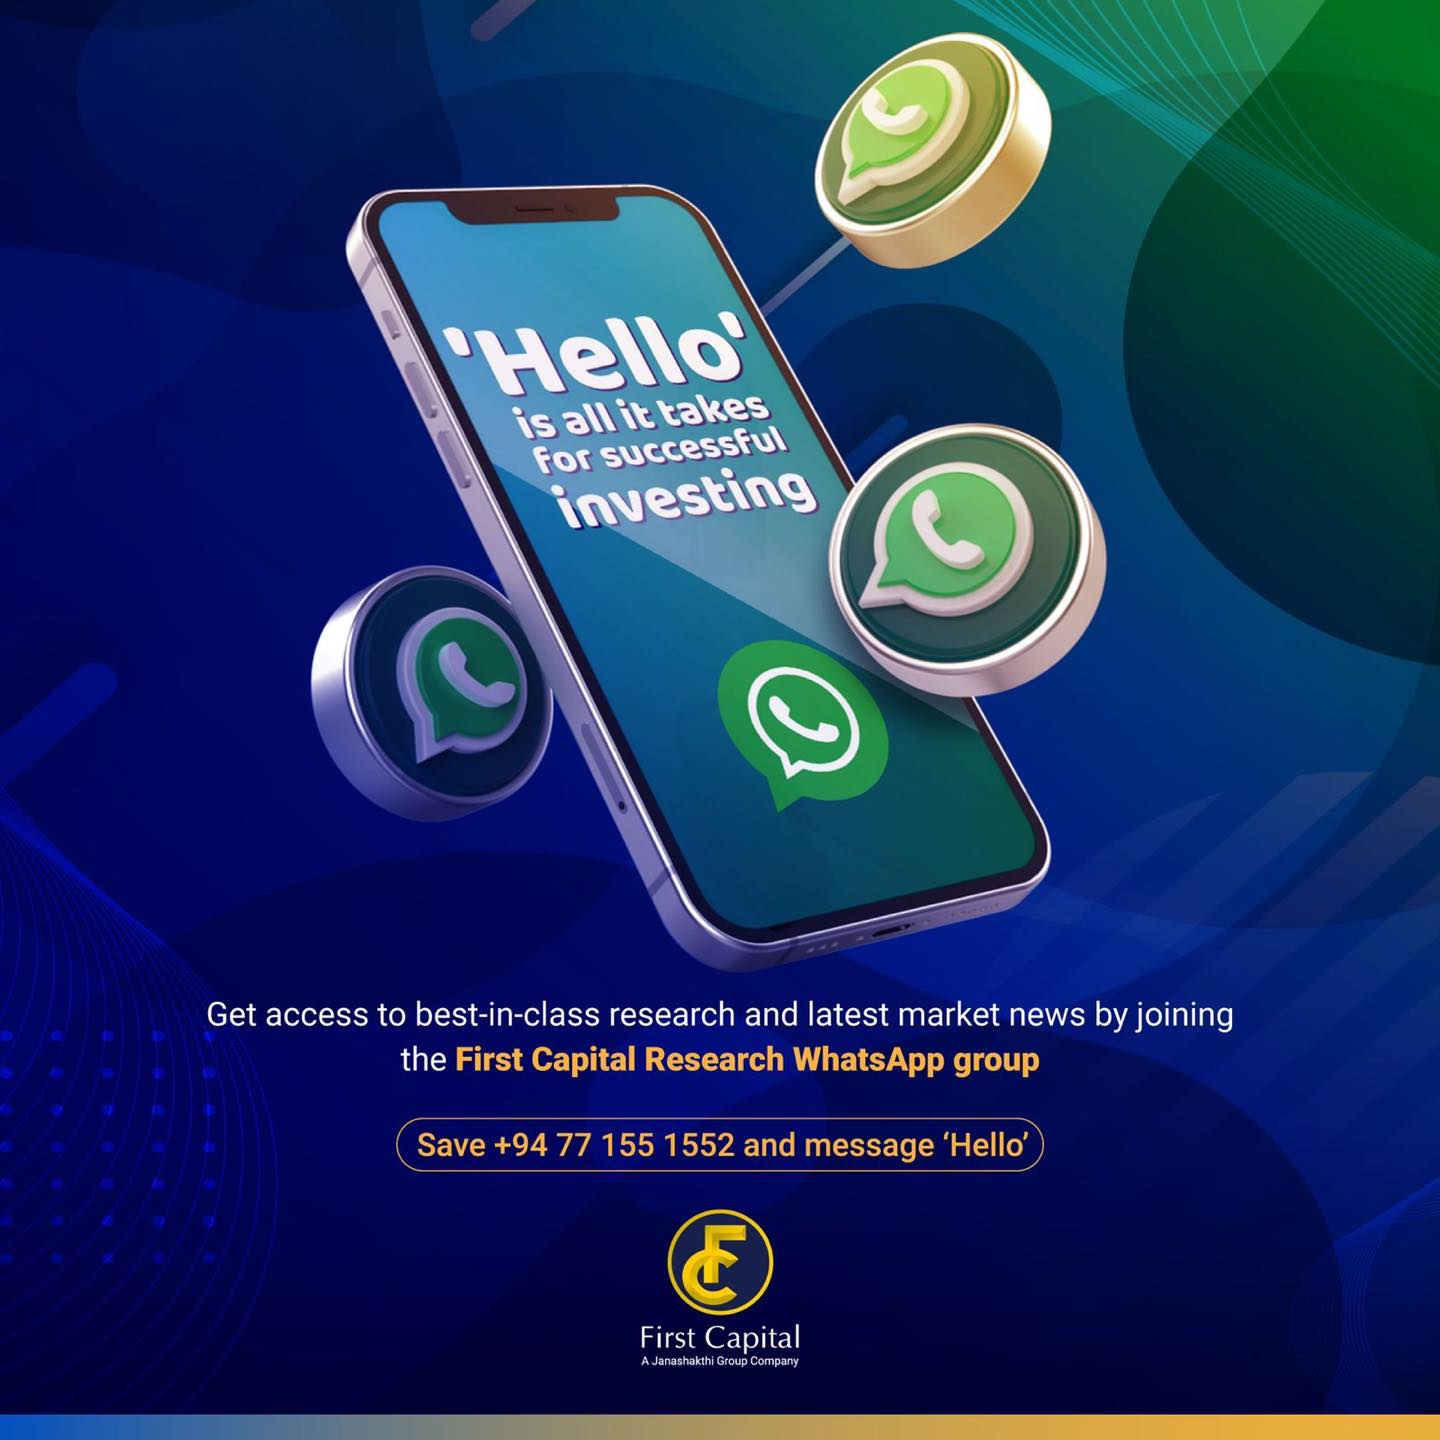 message ‘Hello’ to the First Capital Research WhatsApp